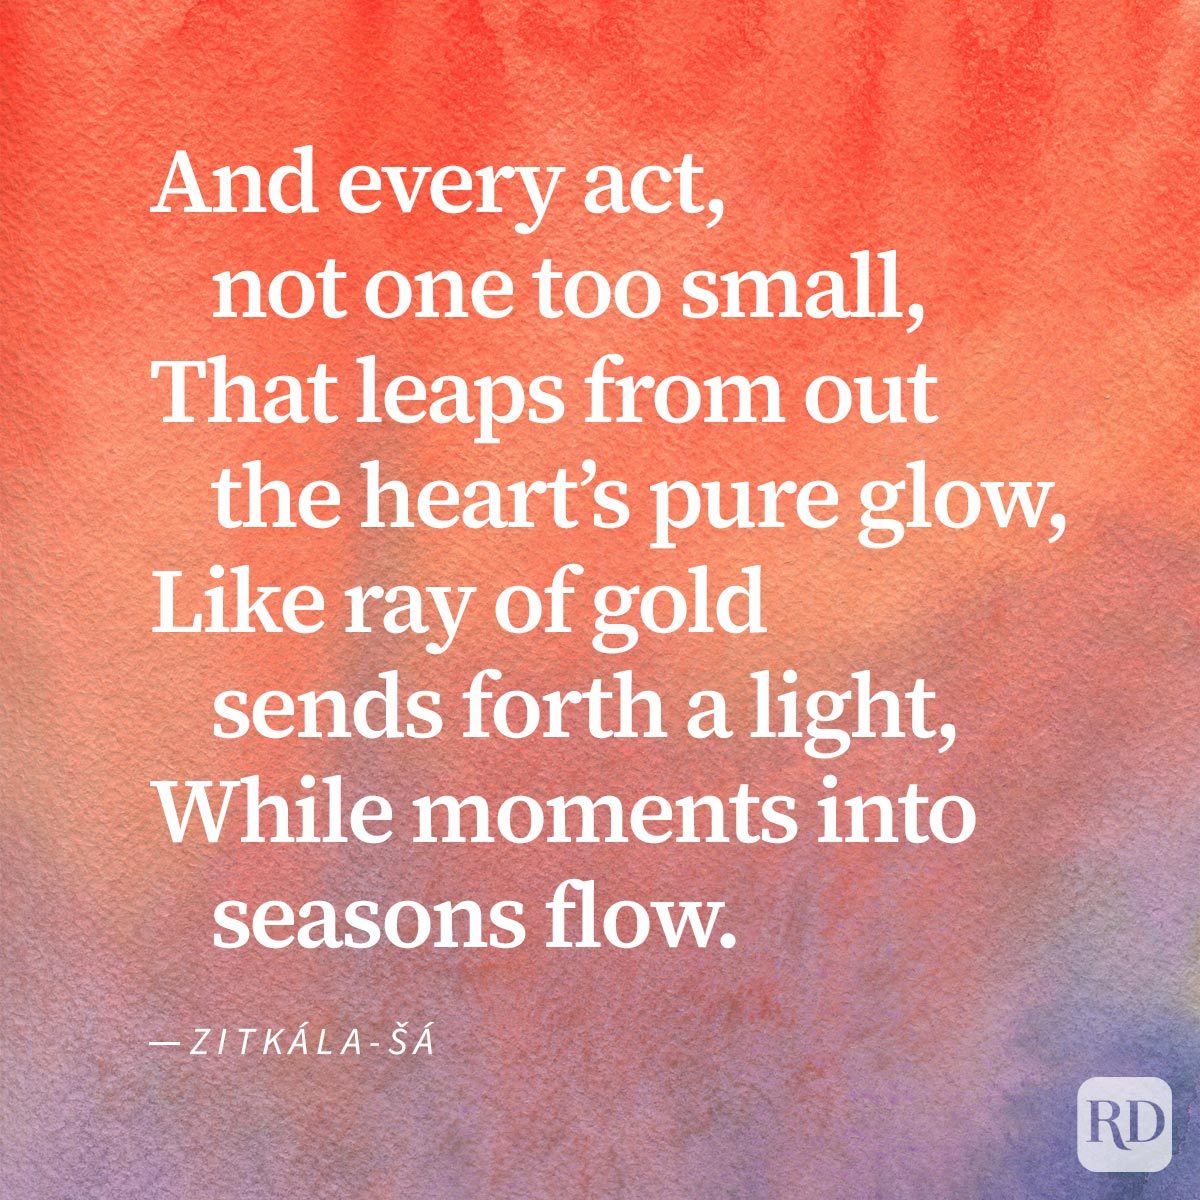 20 Powerful Poems About Life That Will Change How You See The World 11